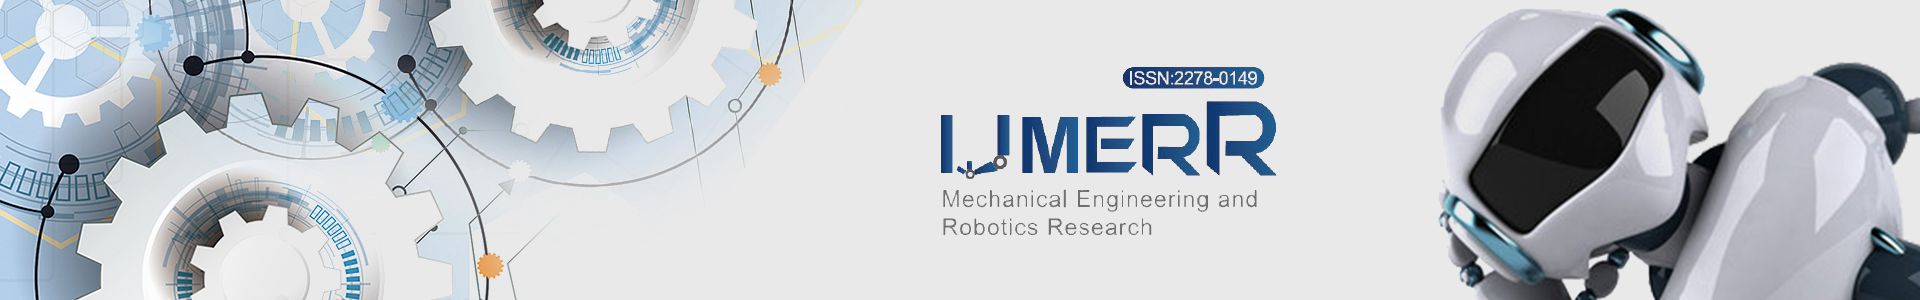 journal of mechanical engineering research